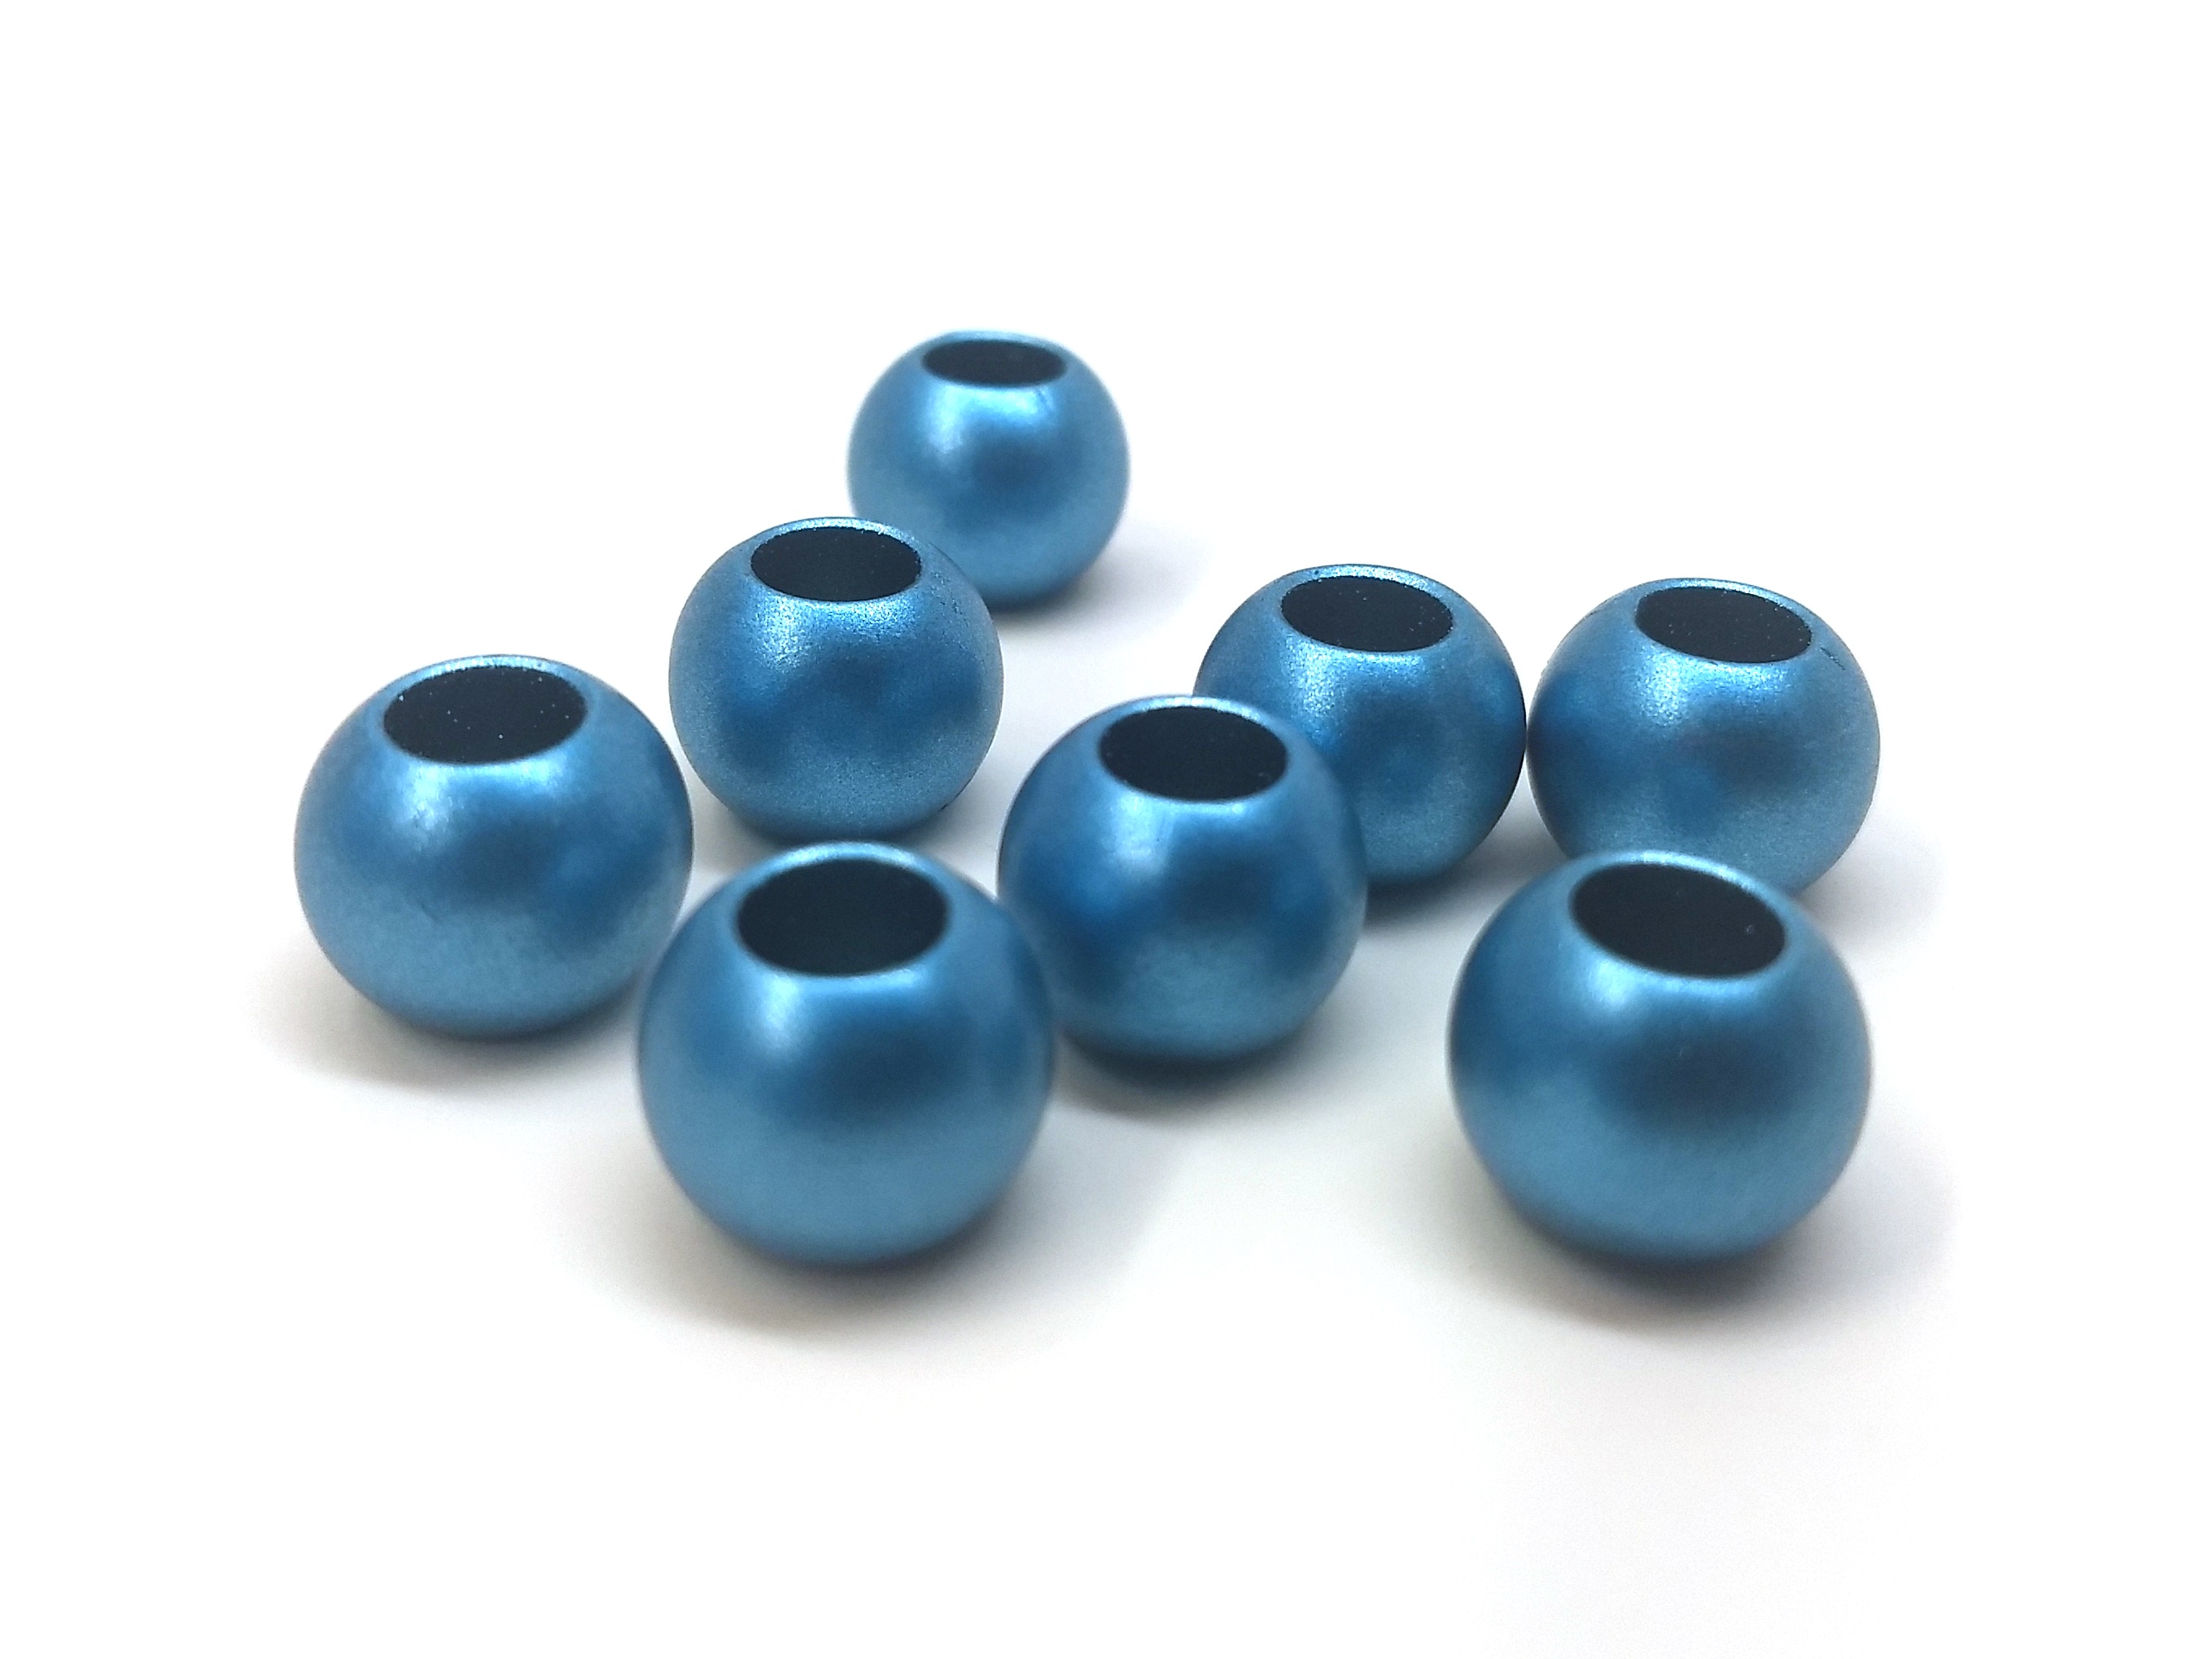 Bd271 75 Pcs Blue Matte Acrylic Smooth Ball Spacer Beads 12mm